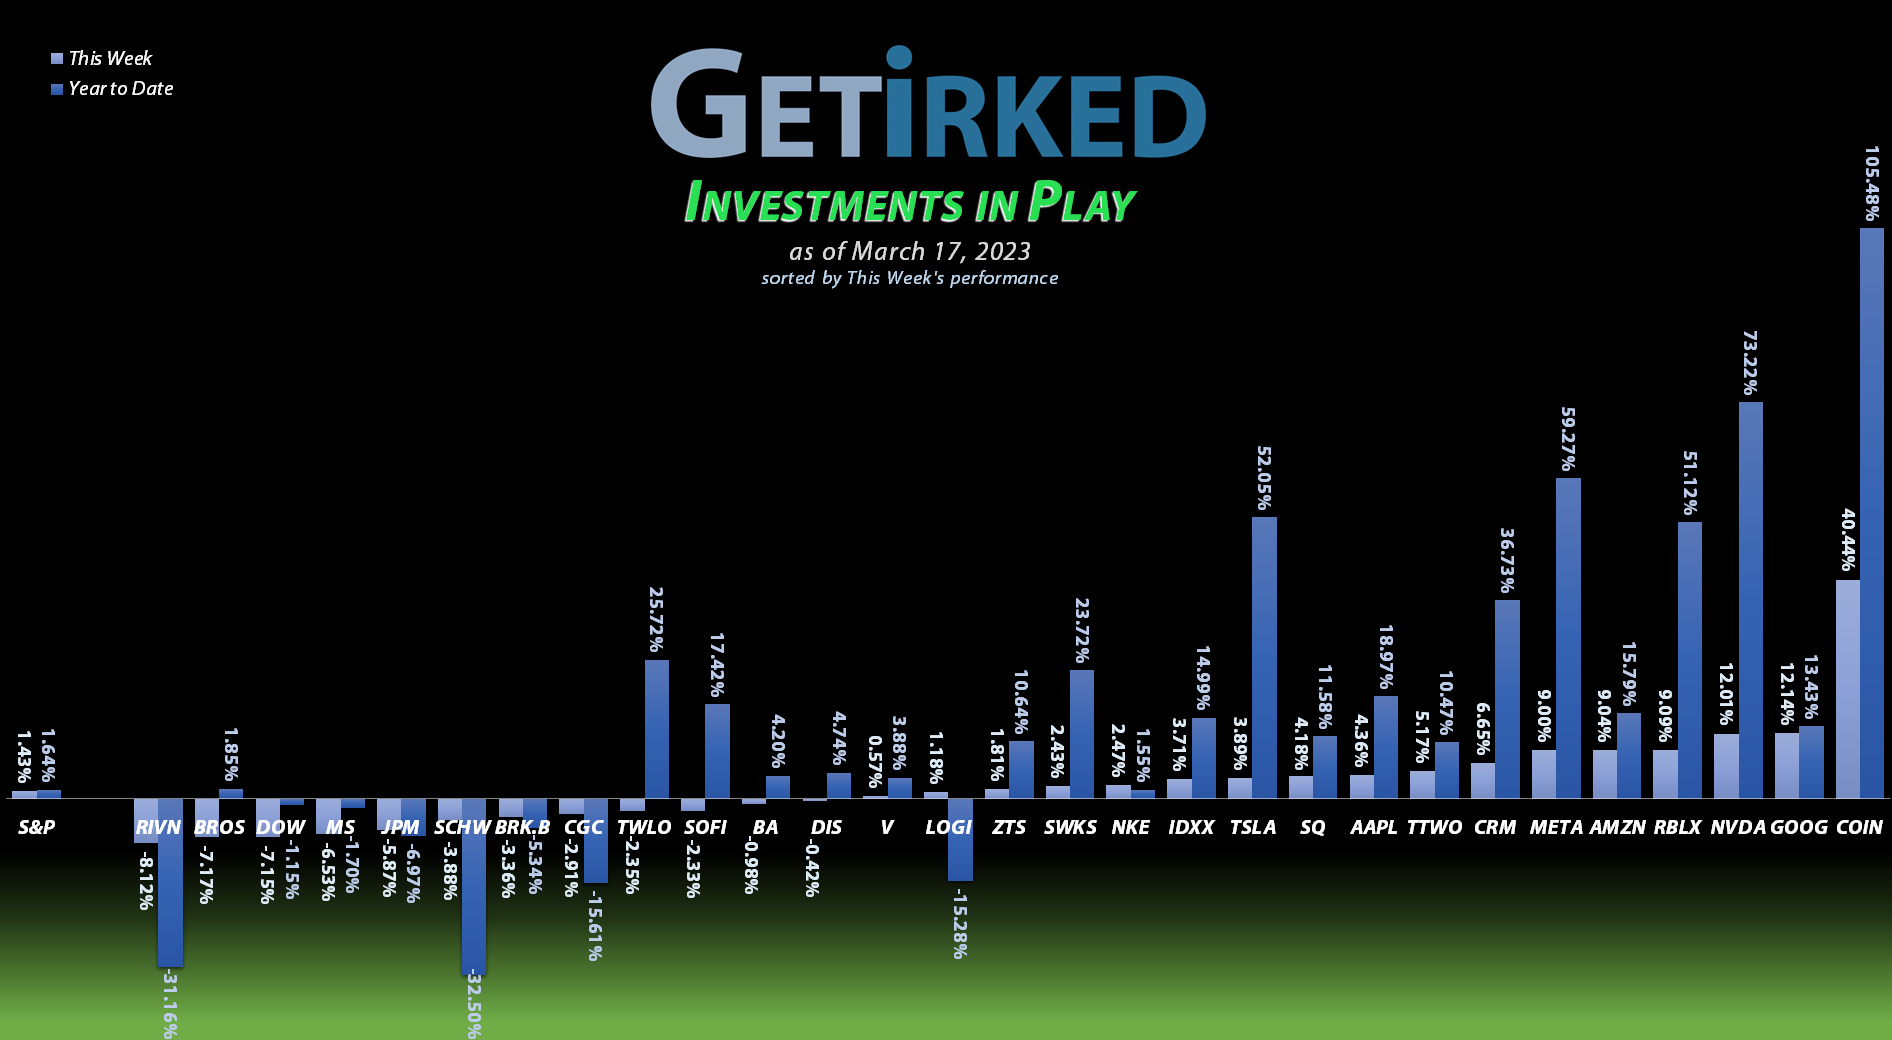 Get Irked - Investments in Play - March 17, 2023